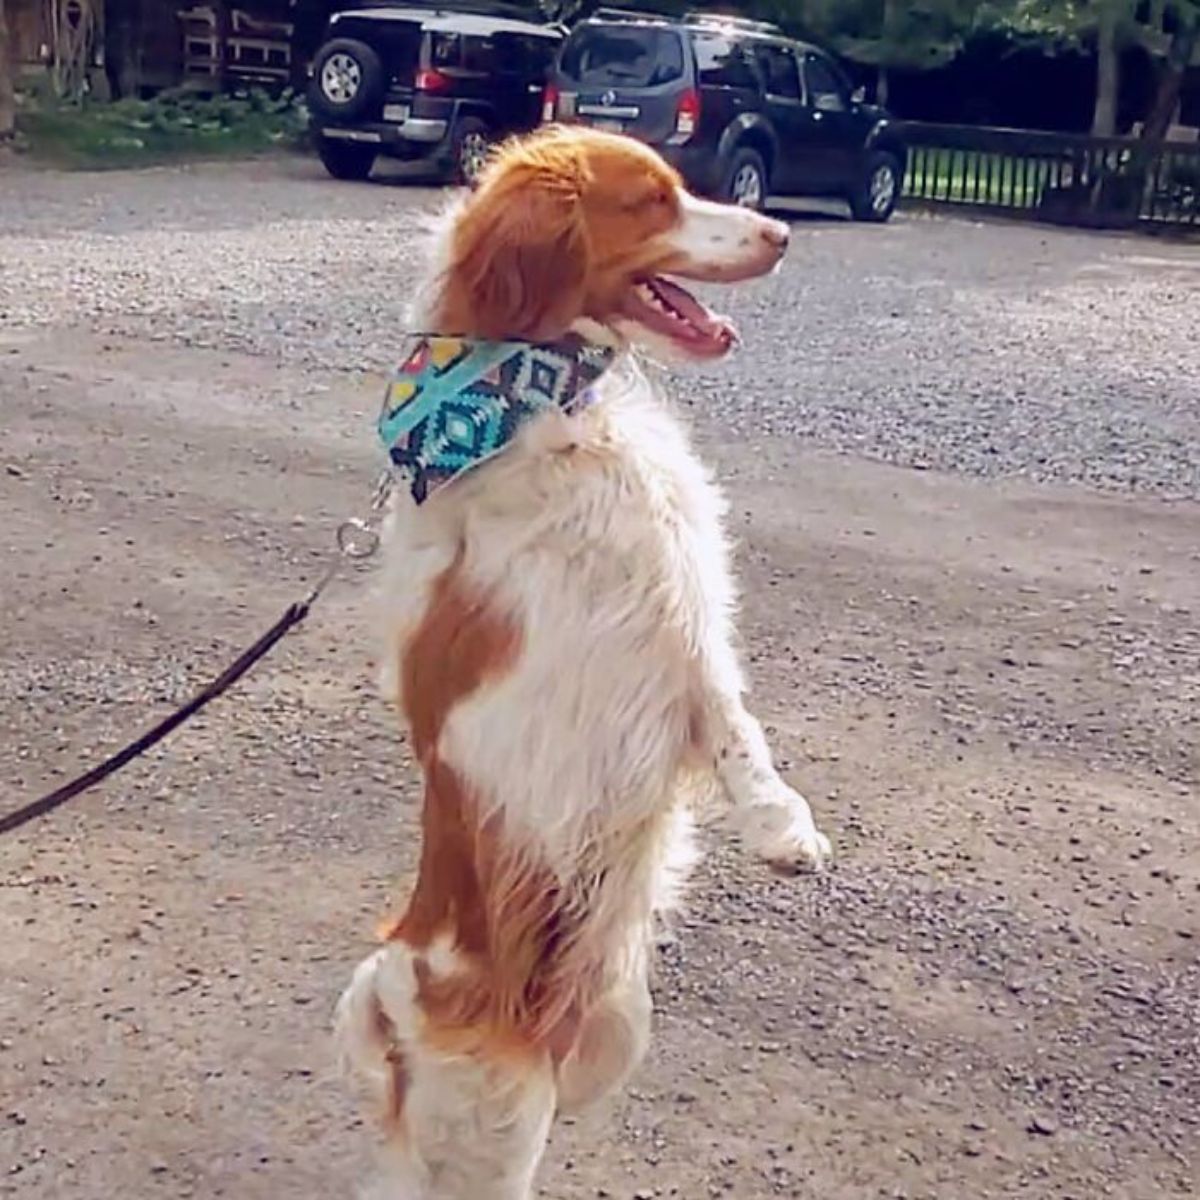 brown and white dog on a leash wearing a patterned bandana standing on hind legs on a road